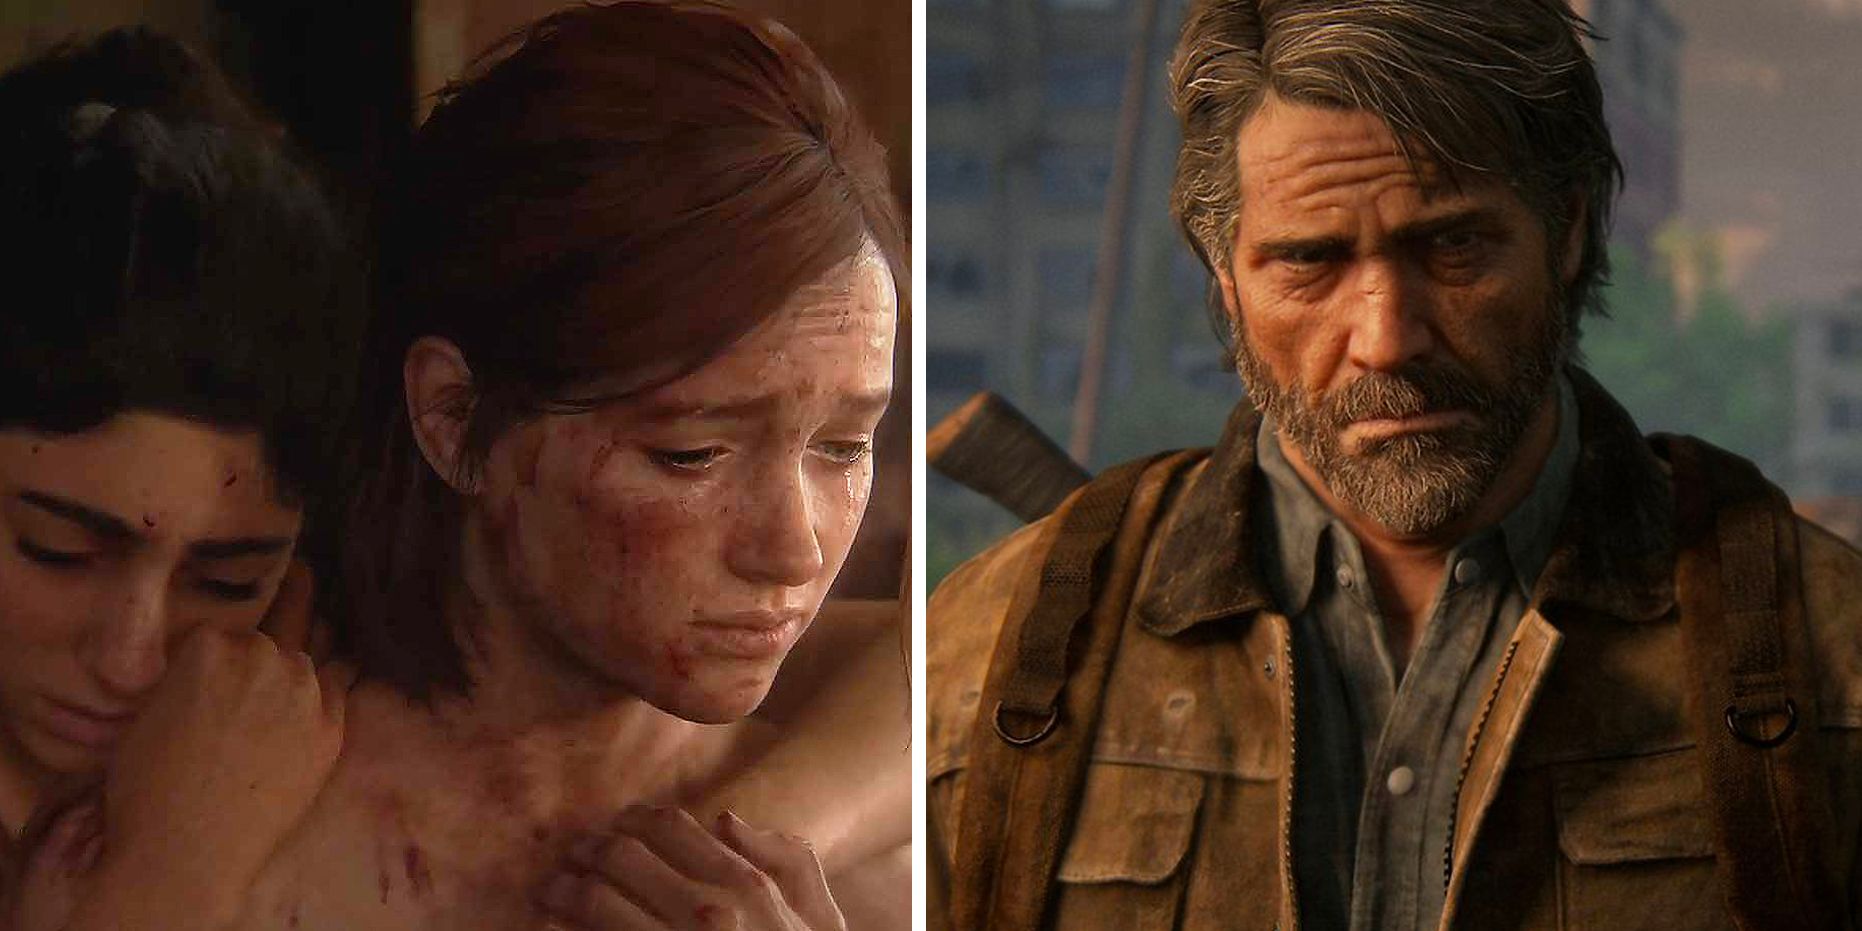 I sadly never got to play The Last of Us since I previously had an